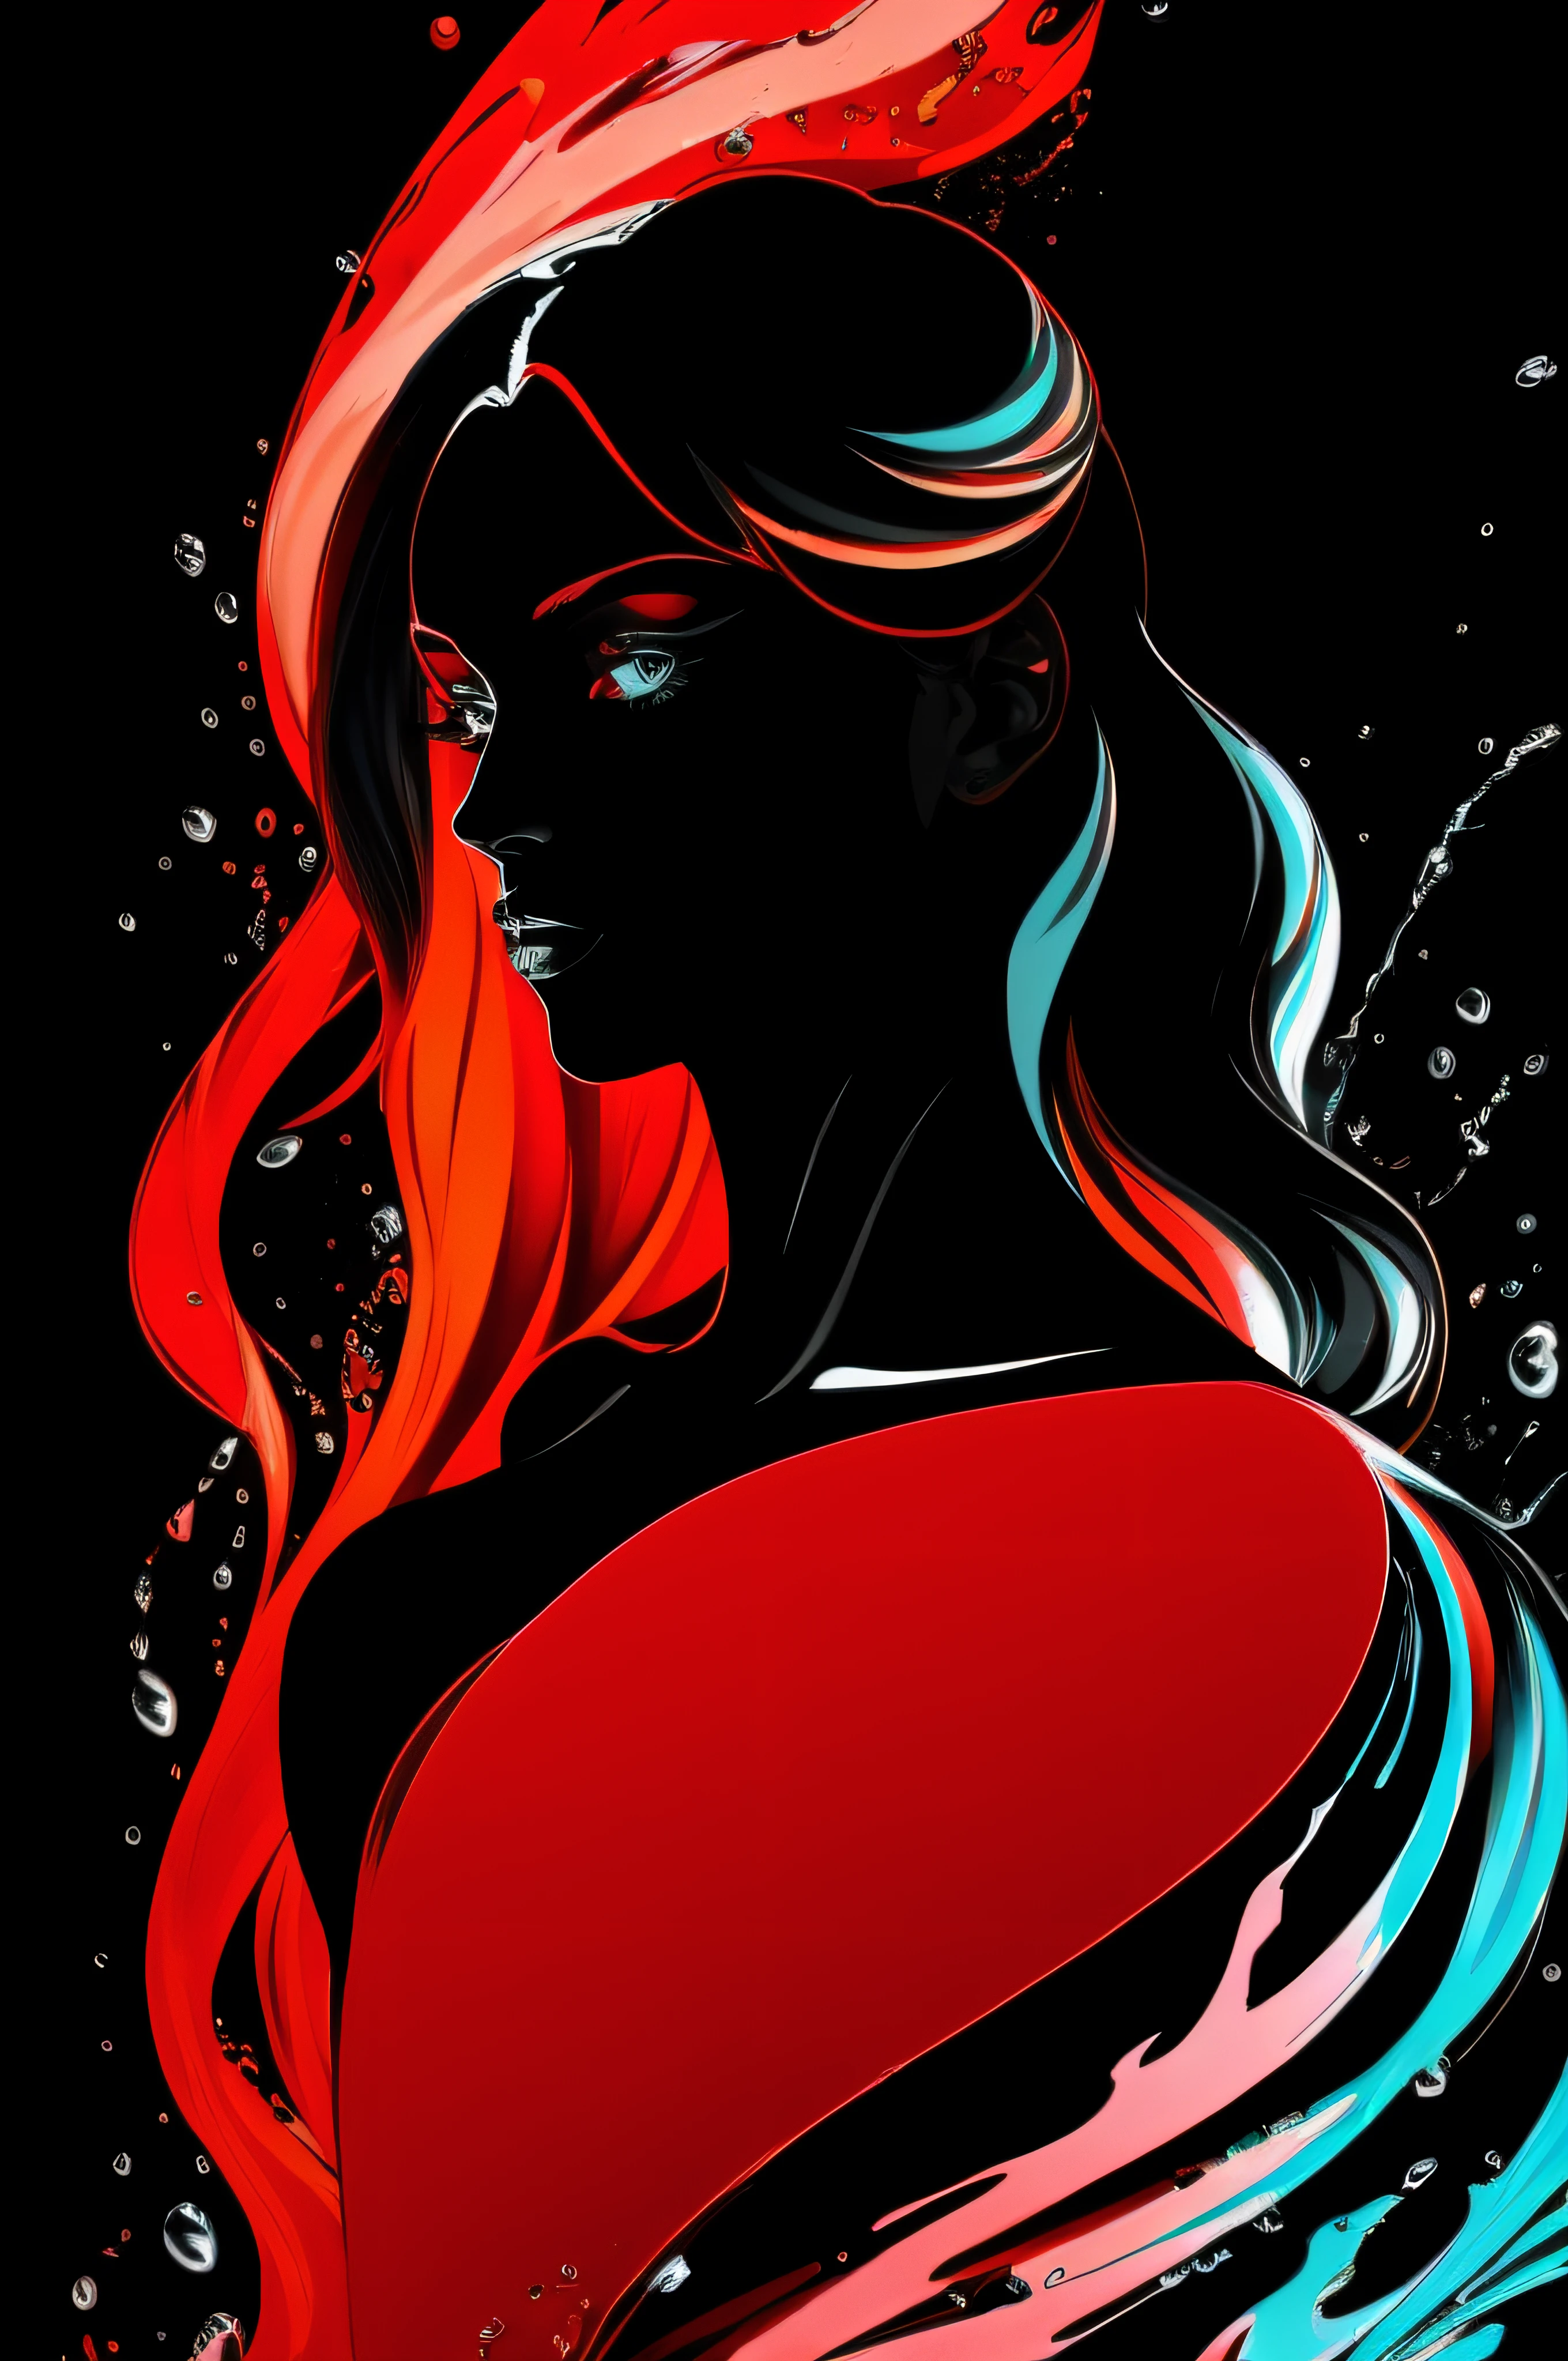 a fine color ink lineart sketching of a woman silhouette with a glossy shiny outline vibrant colors (reflective volumetric) splash,  colorful, best quality, elegant, sharp clear art,
black background